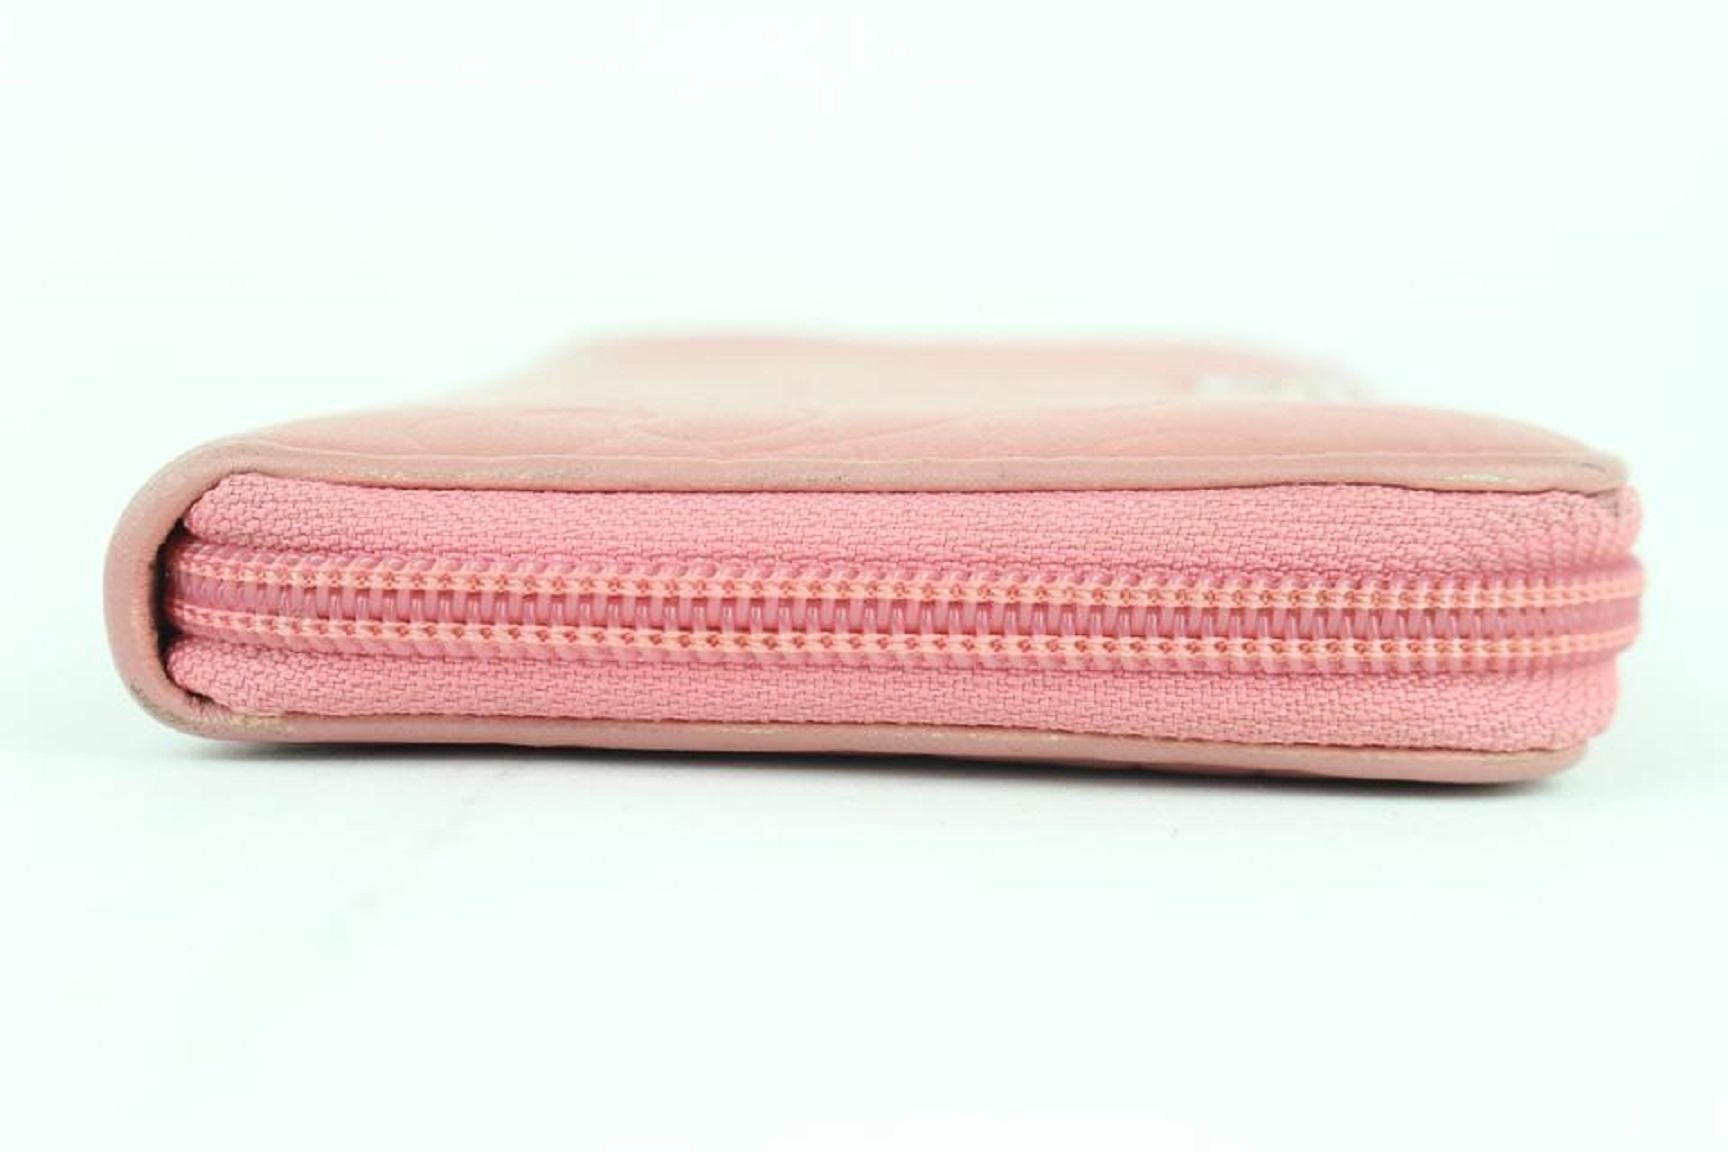 Chanel Embossed Camellia Gusset Zip Around Wallet 2cj1110 Pink Leather Clutch For Sale 6